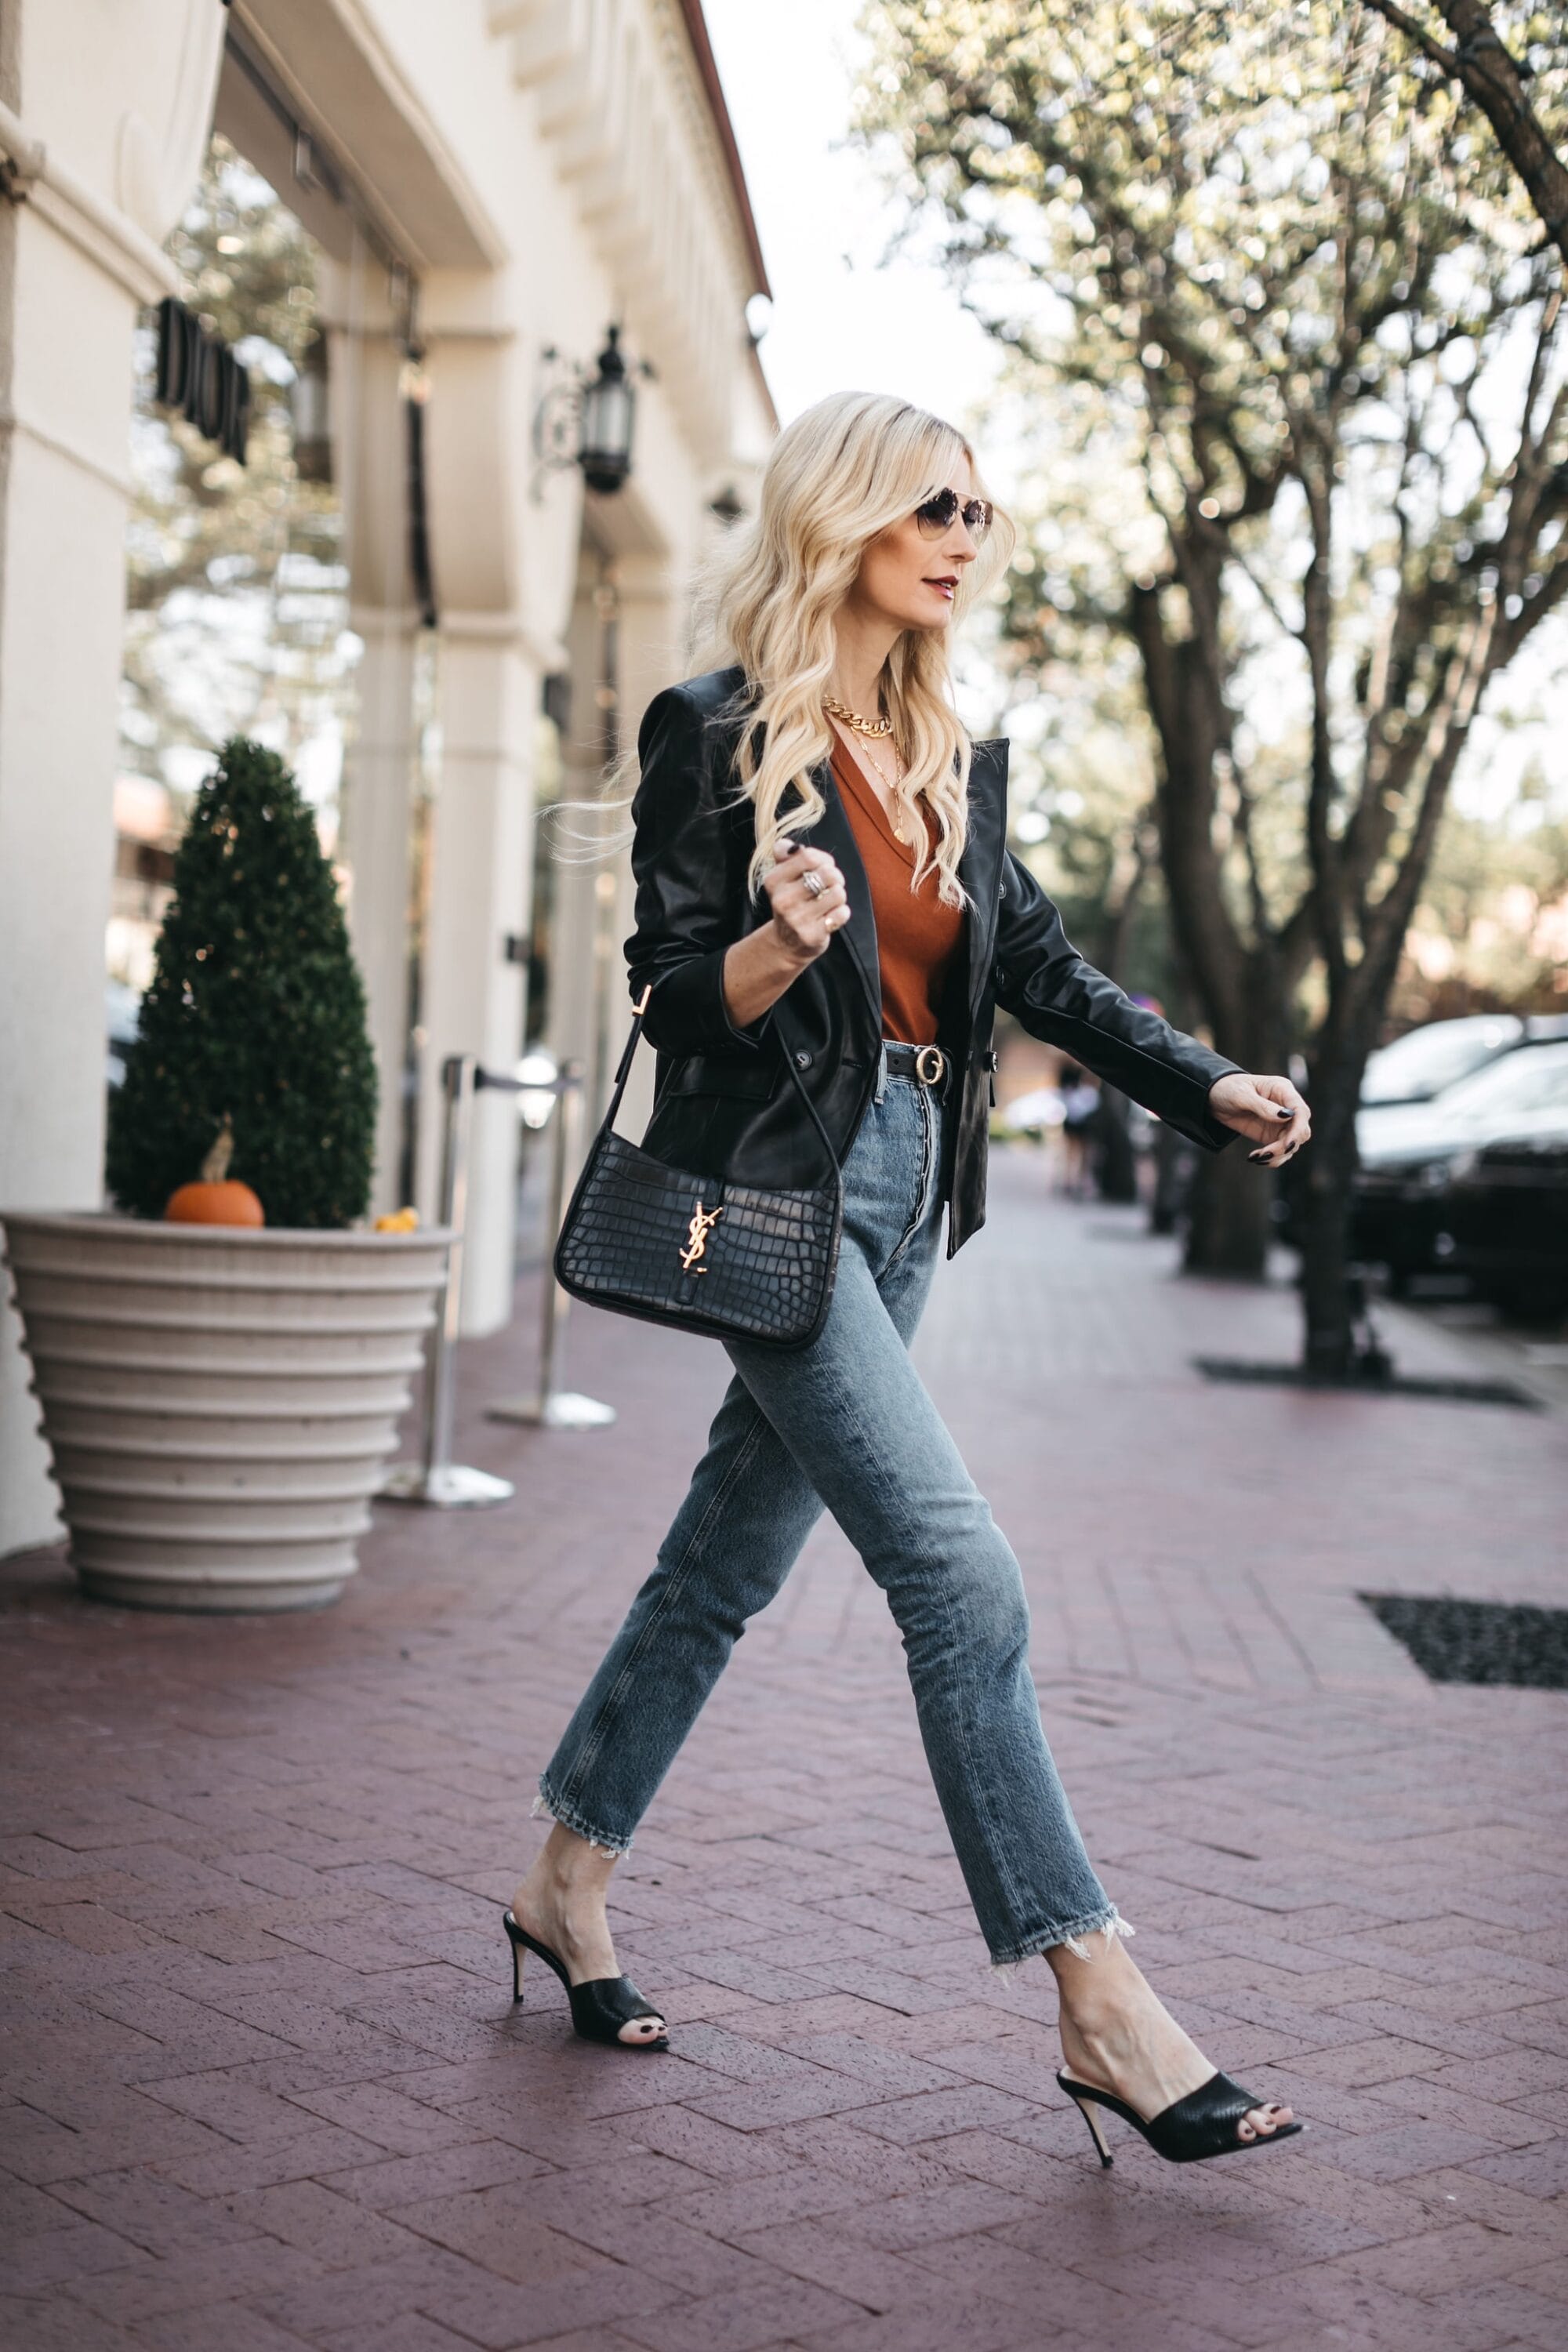 Over 40 fashion influencer wearing black heeled sandals with cropped riley jeans and rust colored top underneath black faux leather blazer from Evereve.